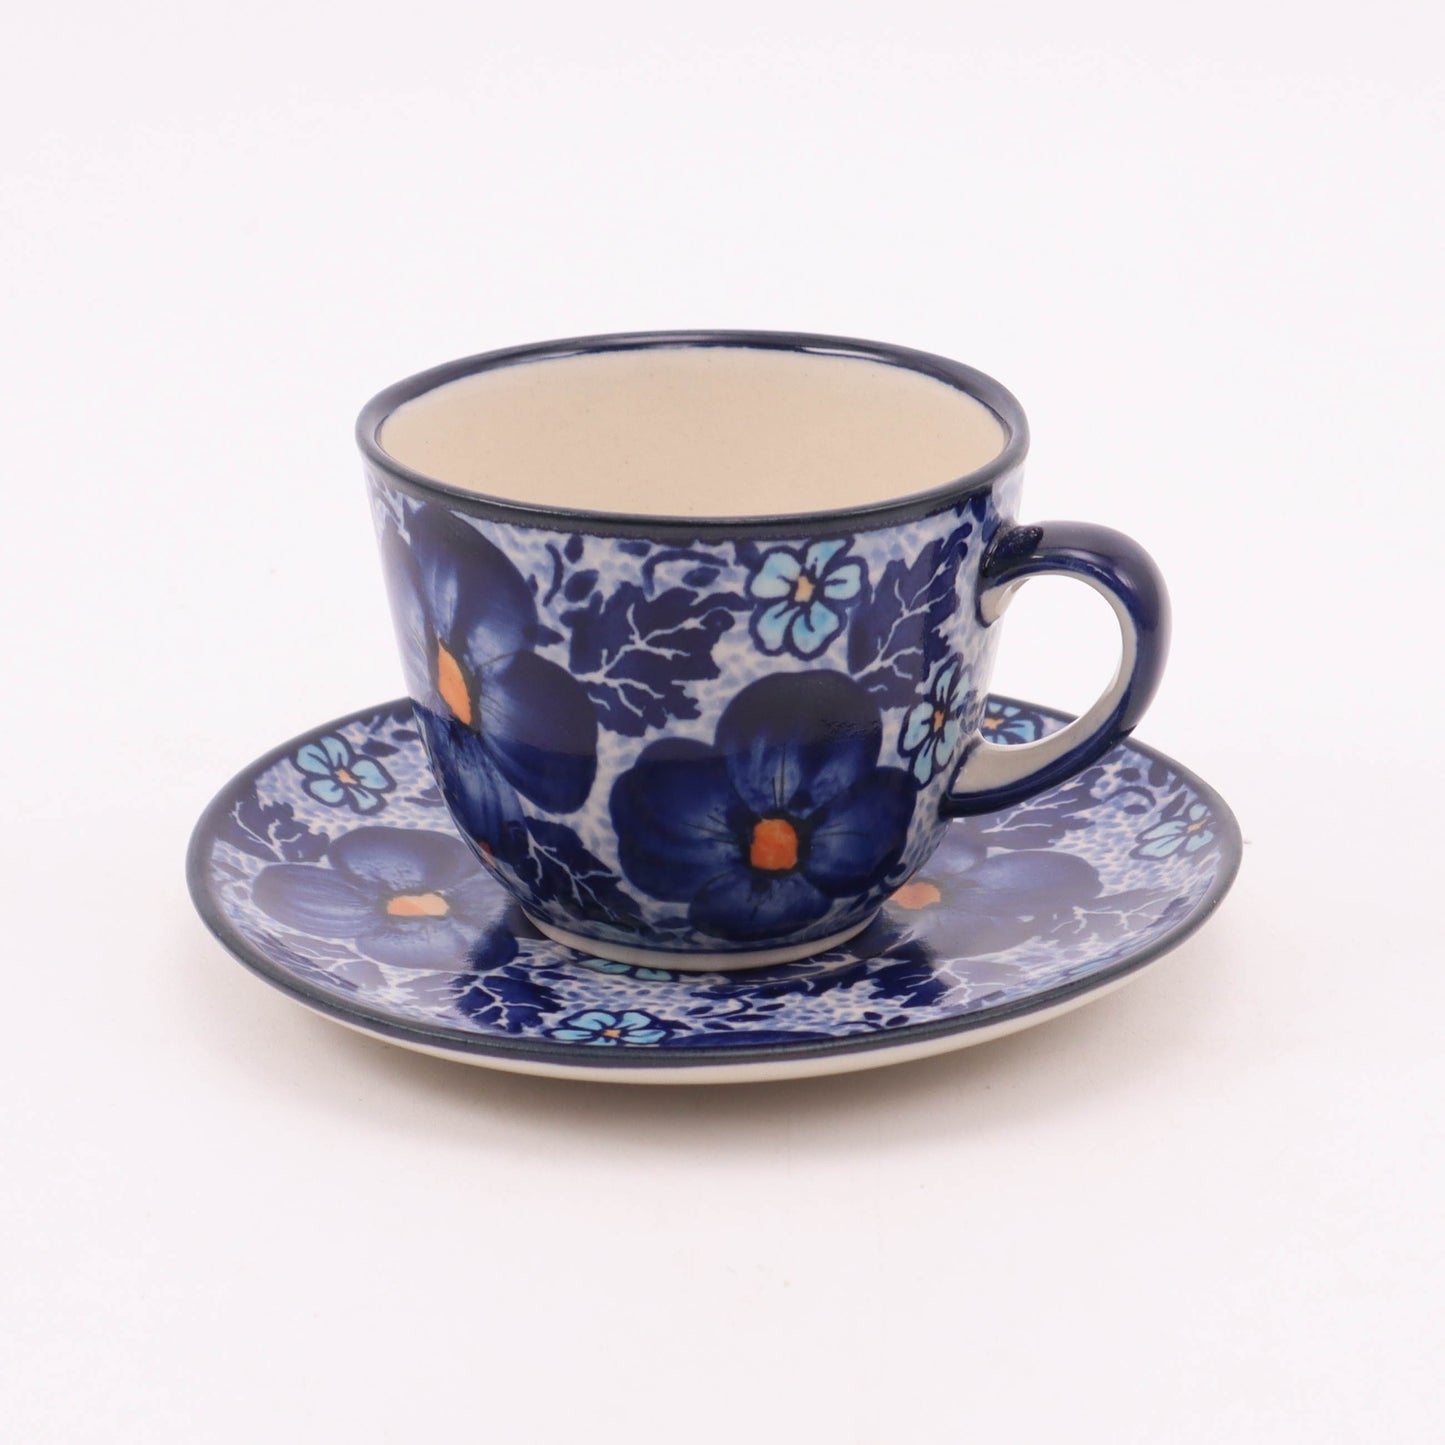 4oz Heart Bottom Thermal Teacup and Saucer. Pattern: Denim Dreams